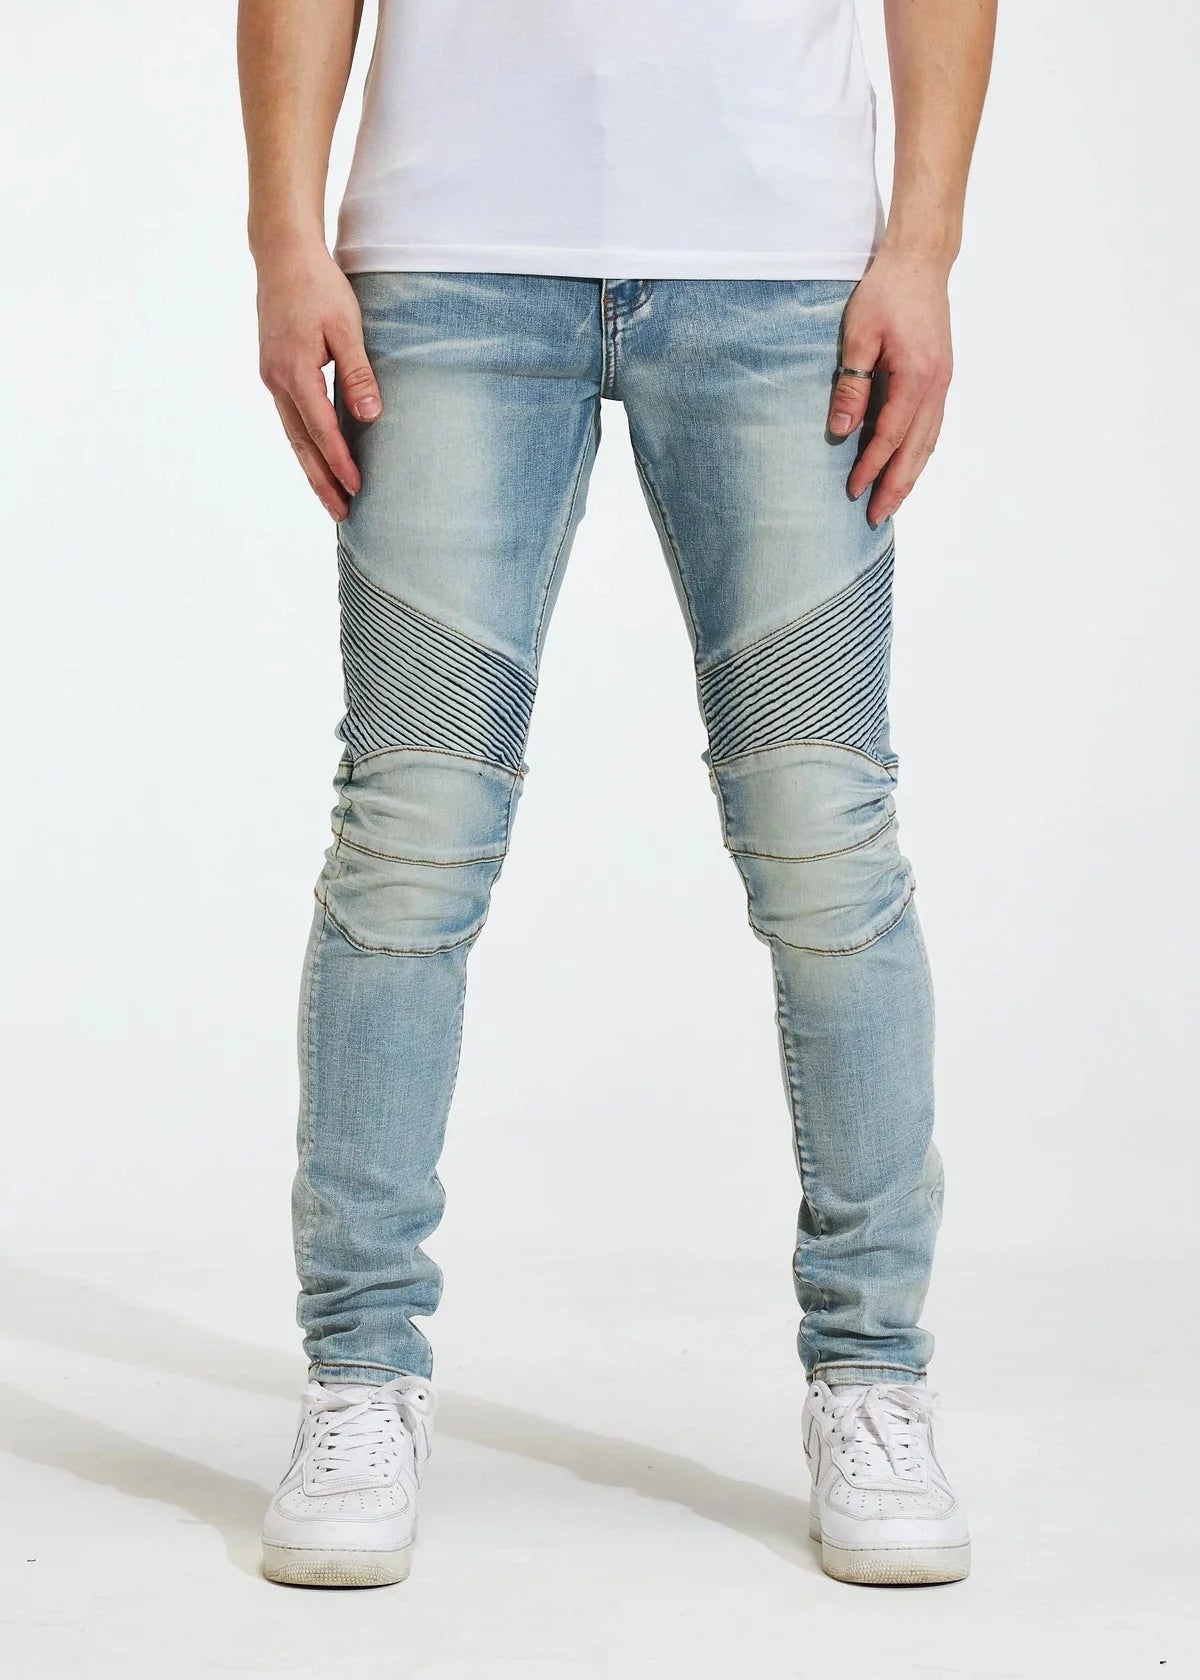 CRYSP DENIM MOTO JEANS WITH RIBBED KNEE BLUE WASH - CRYSPSP120-110